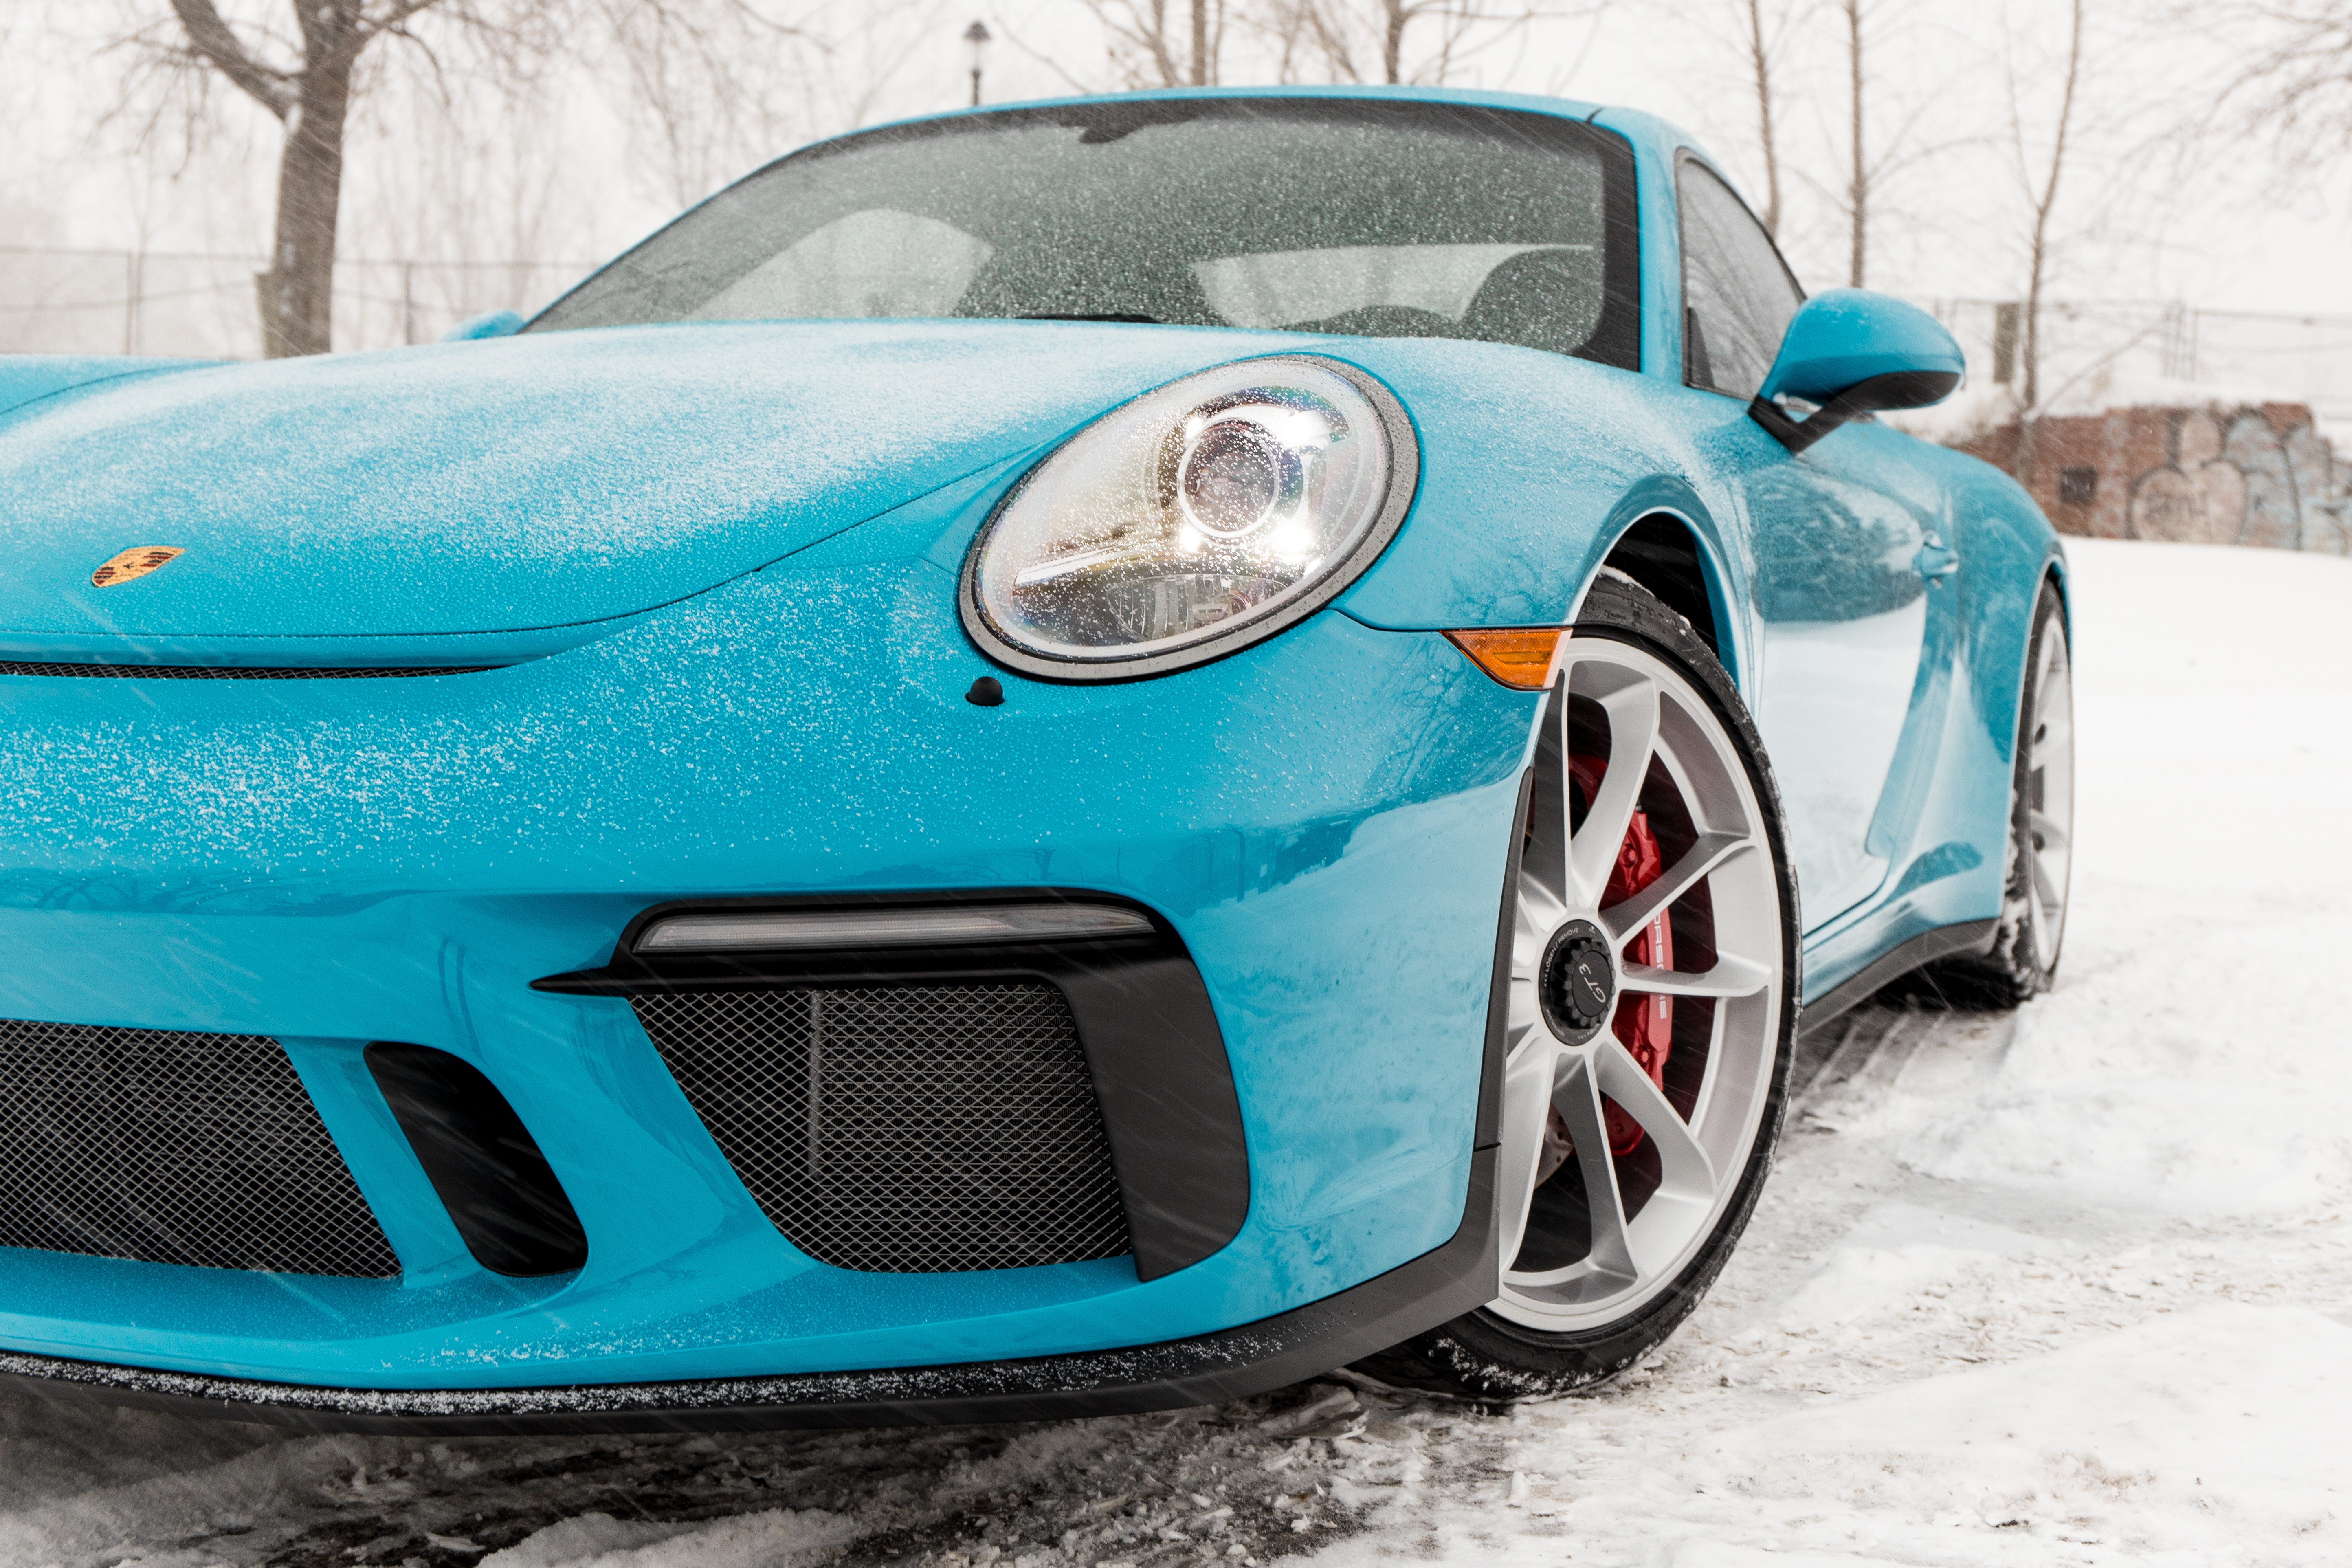 142538 download wallpaper porsche, cars, wheel, headlight, snowfall screensavers and pictures for free